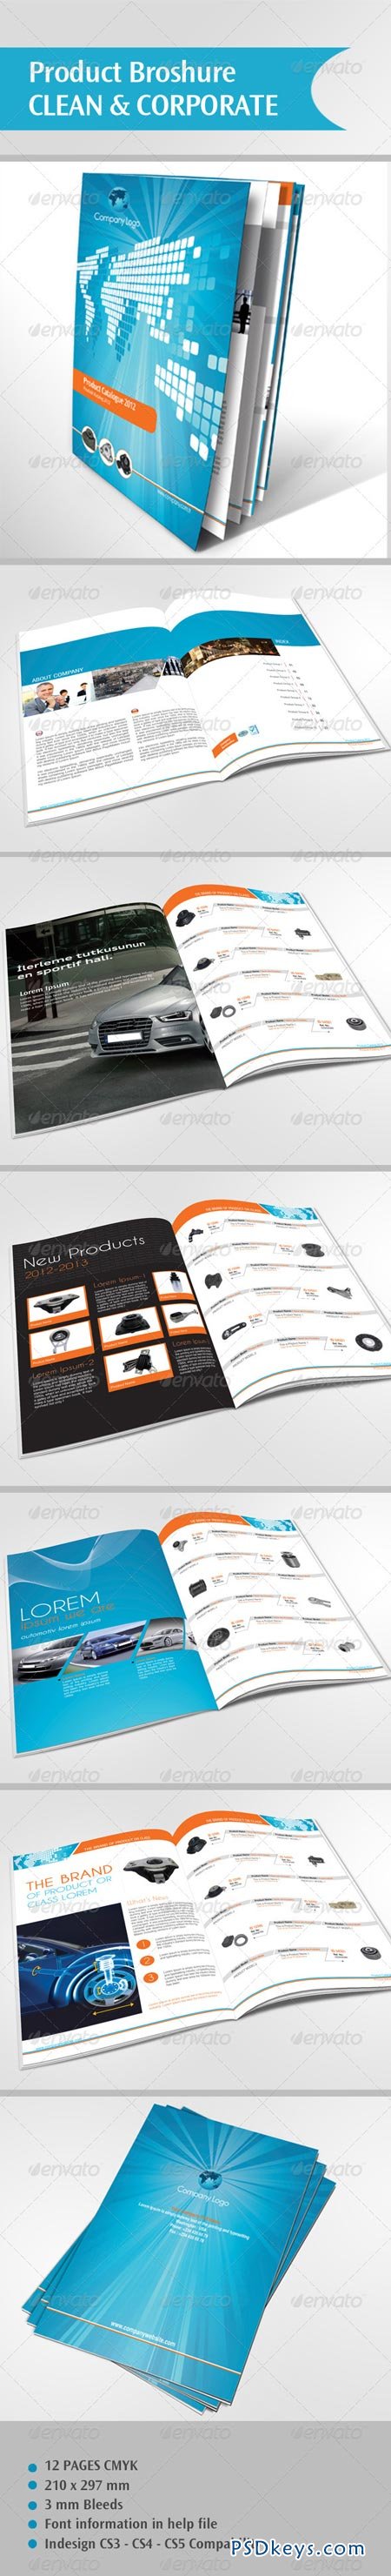 Clean & Corporate Product Brochure 2494966